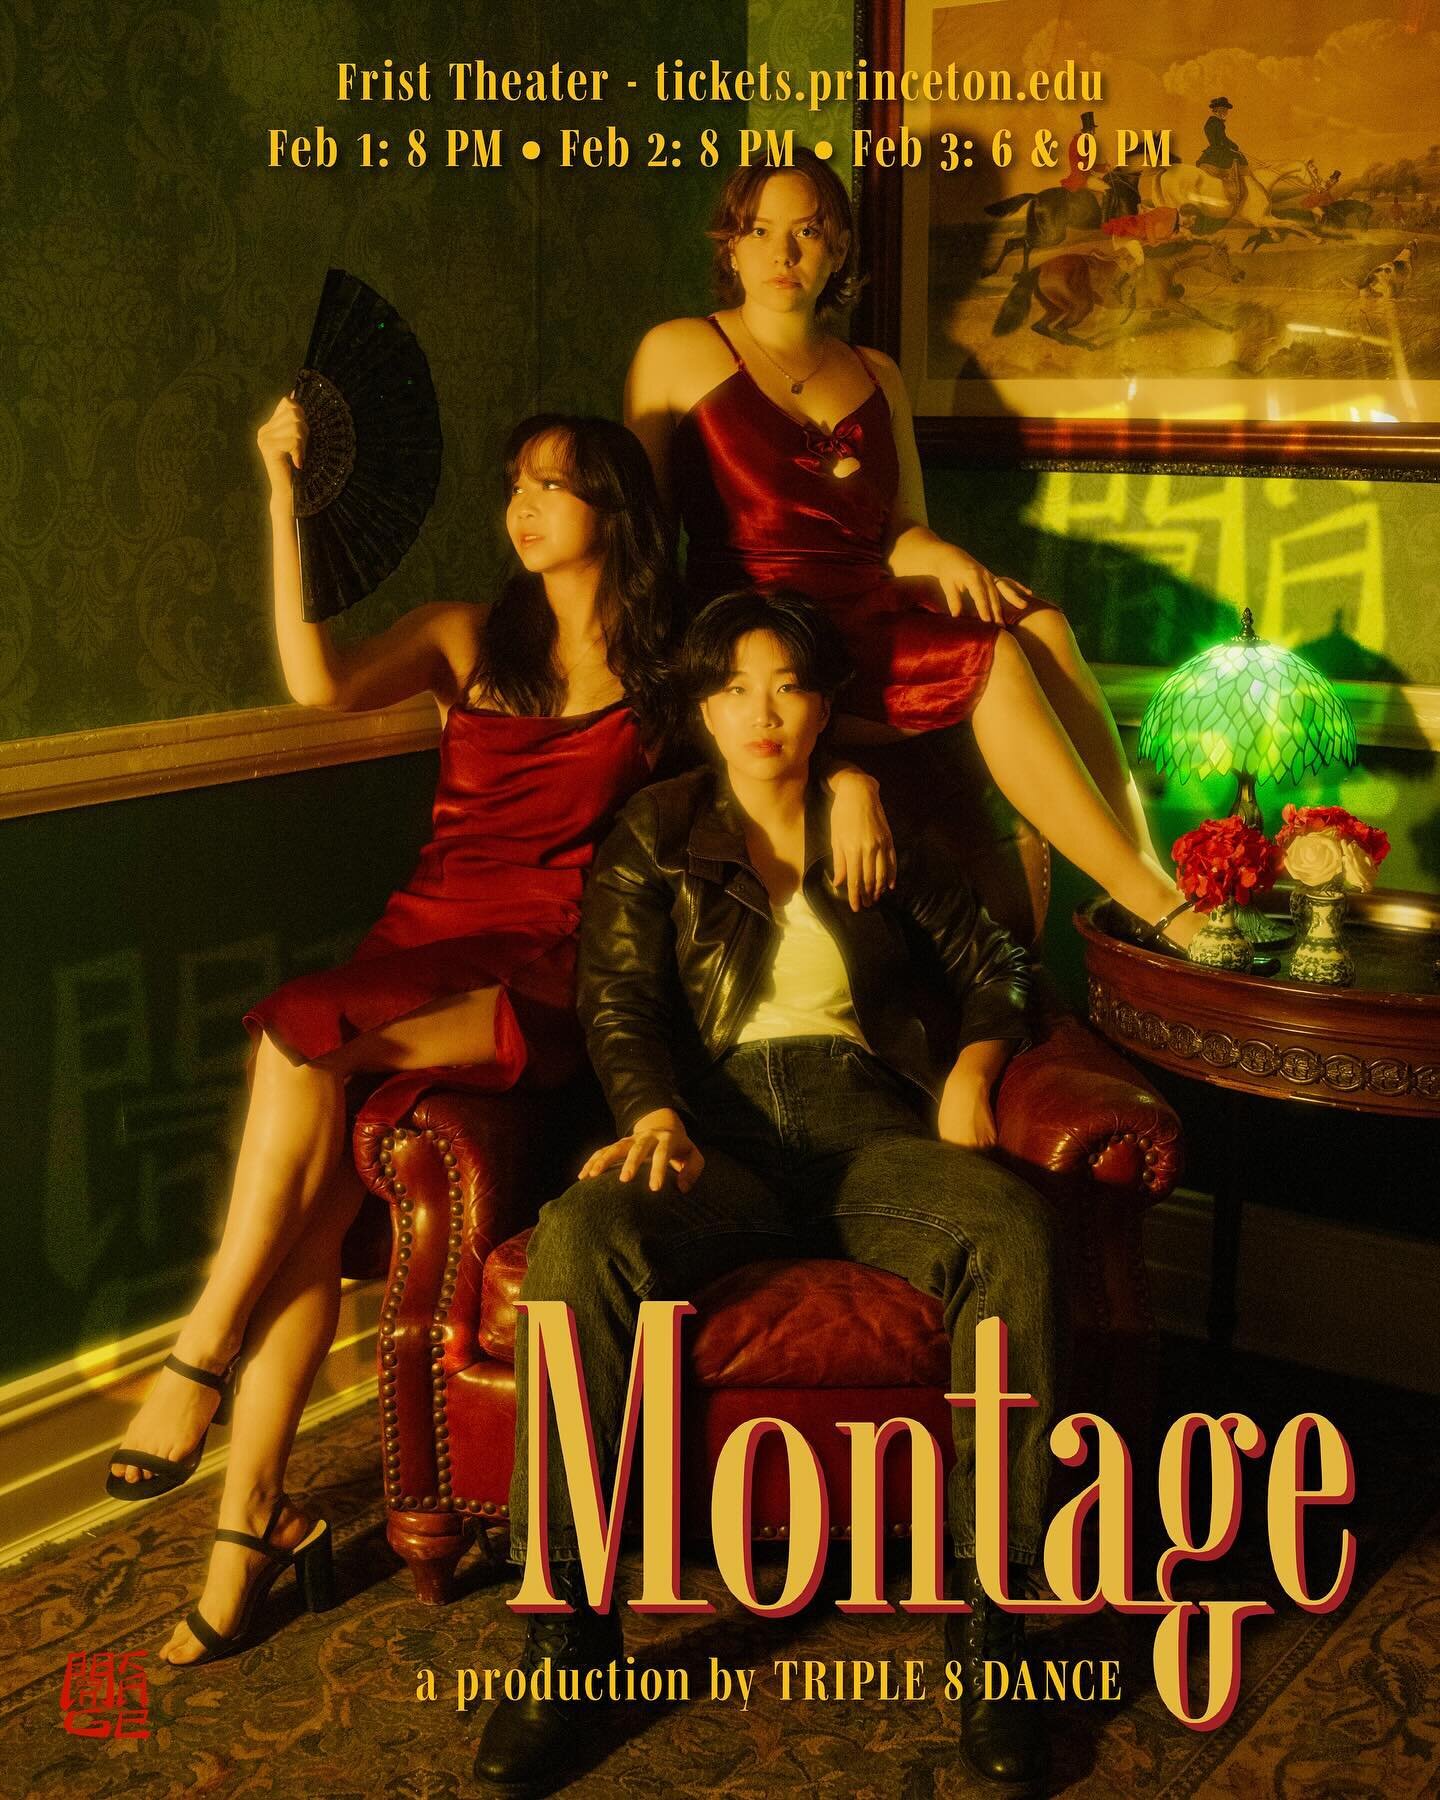 Don&rsquo;t miss the premiere of MONTAGE TONIGHT! ✨ Get your tickets @ LINK IN BIO

Dates:
Thursday, February 1st - 8 PM
Friday, February 2nd - 8 PM
Saturday, February 3rd - 6 PM &amp; 9 PM

Location: Frist Theatre

Tickets on sale at Frist Campus Ce